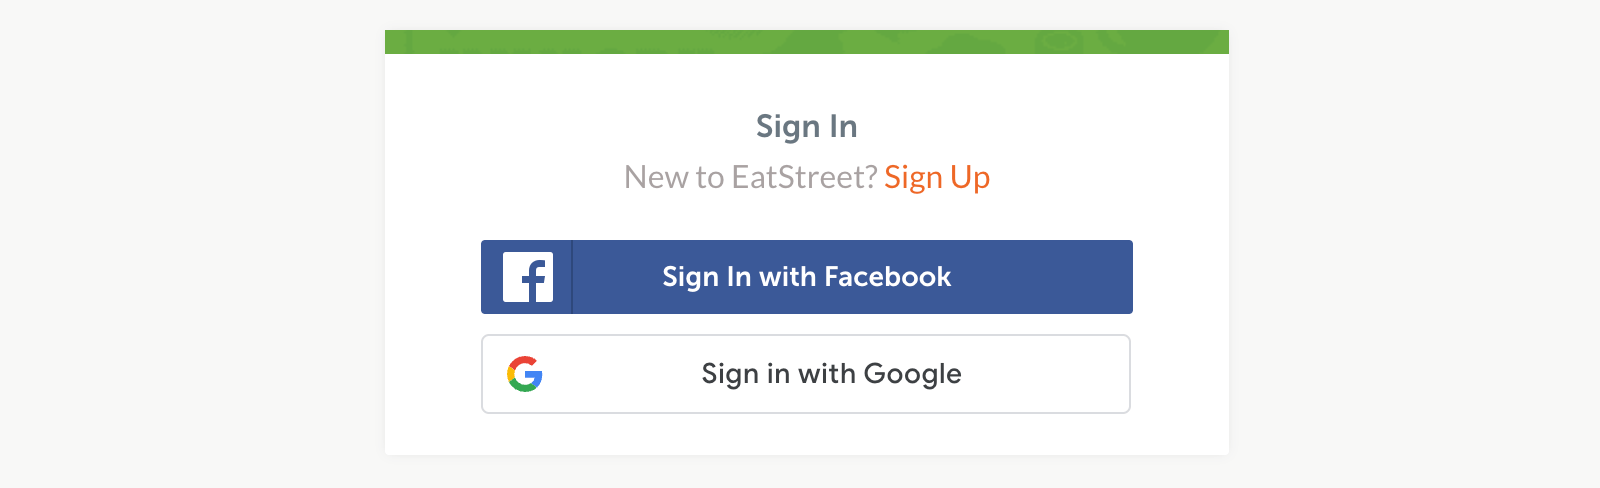 A truncated screenshot of EatStreet's sign in page